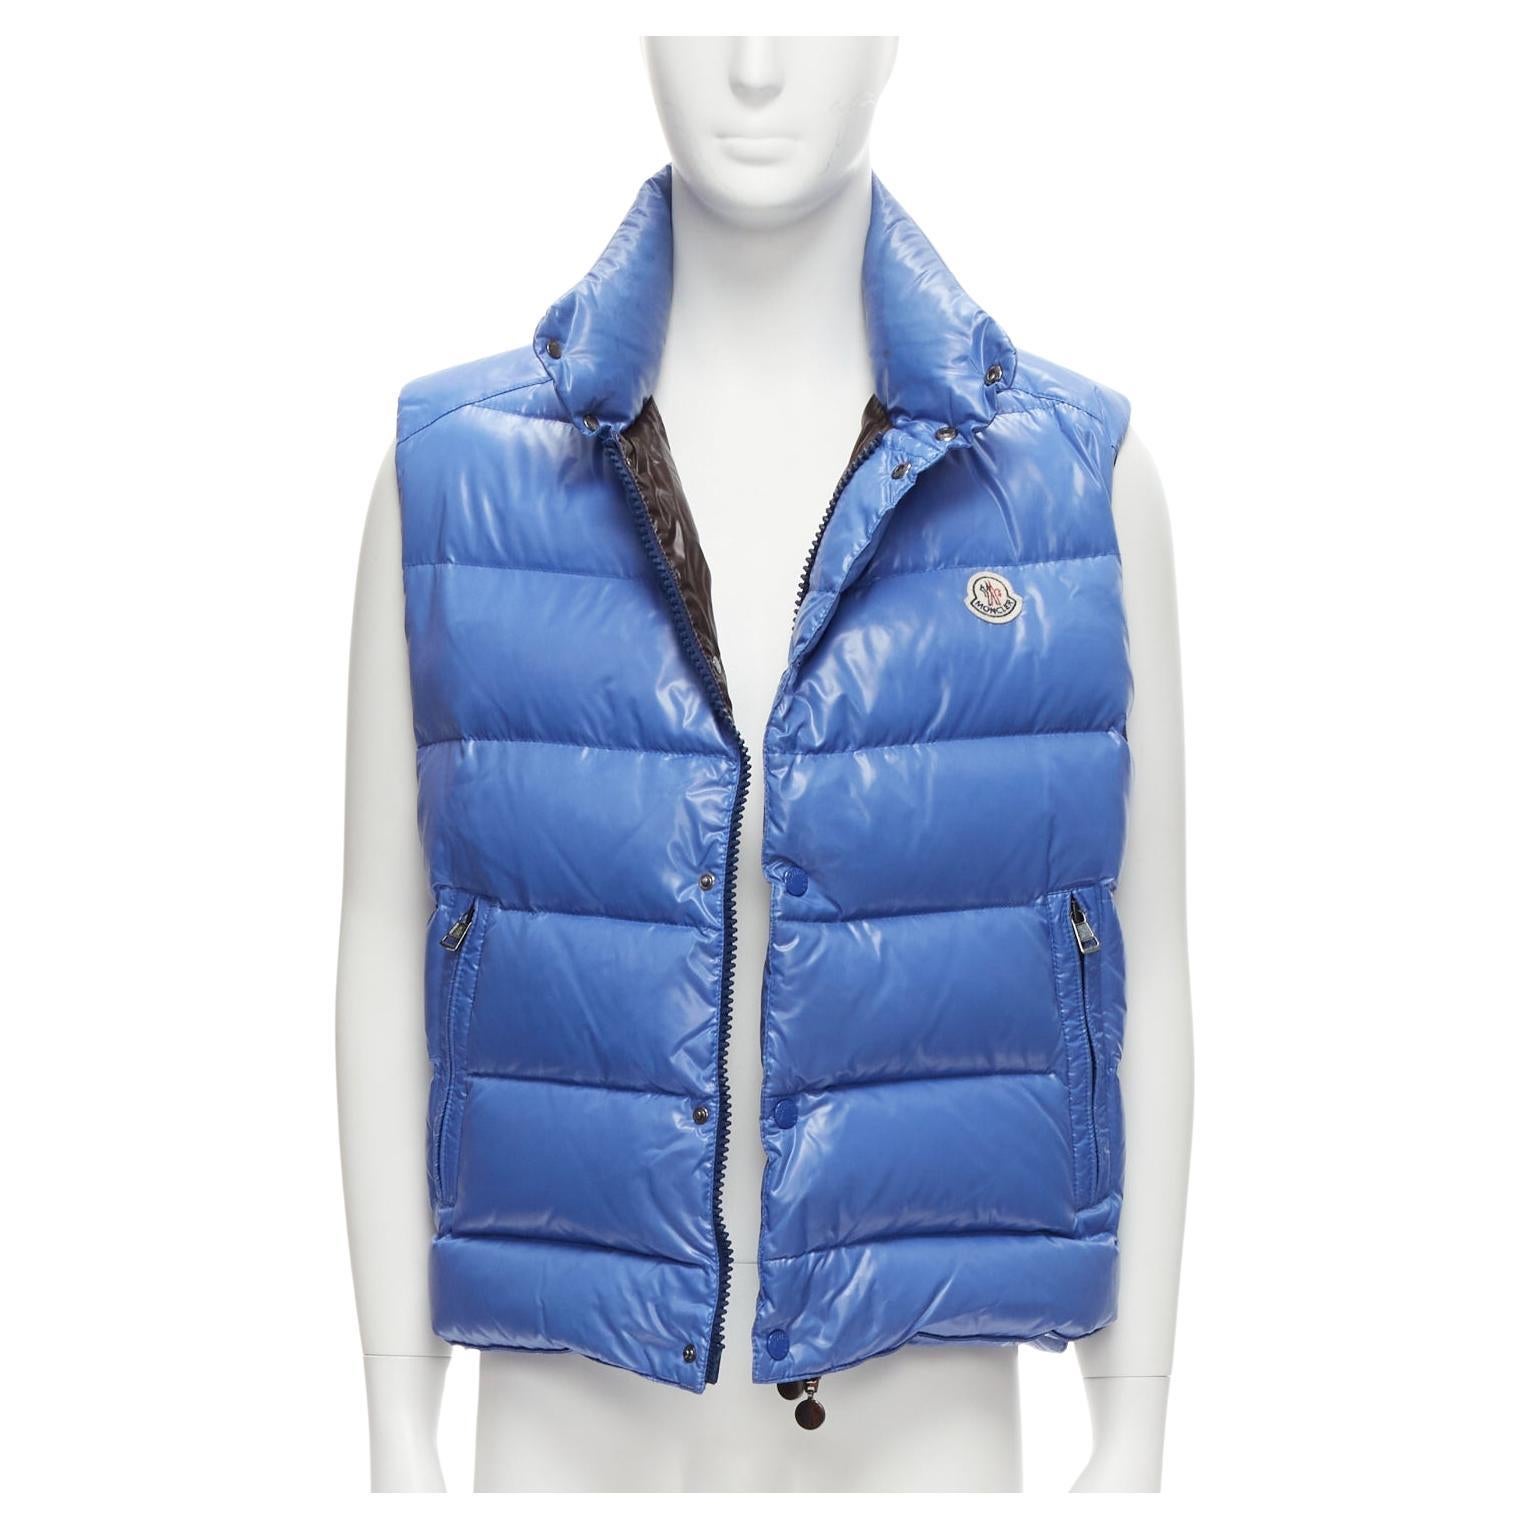 MONCLER Tib Gilet blue down feather high neck padded puffer vest jacket Size3 M